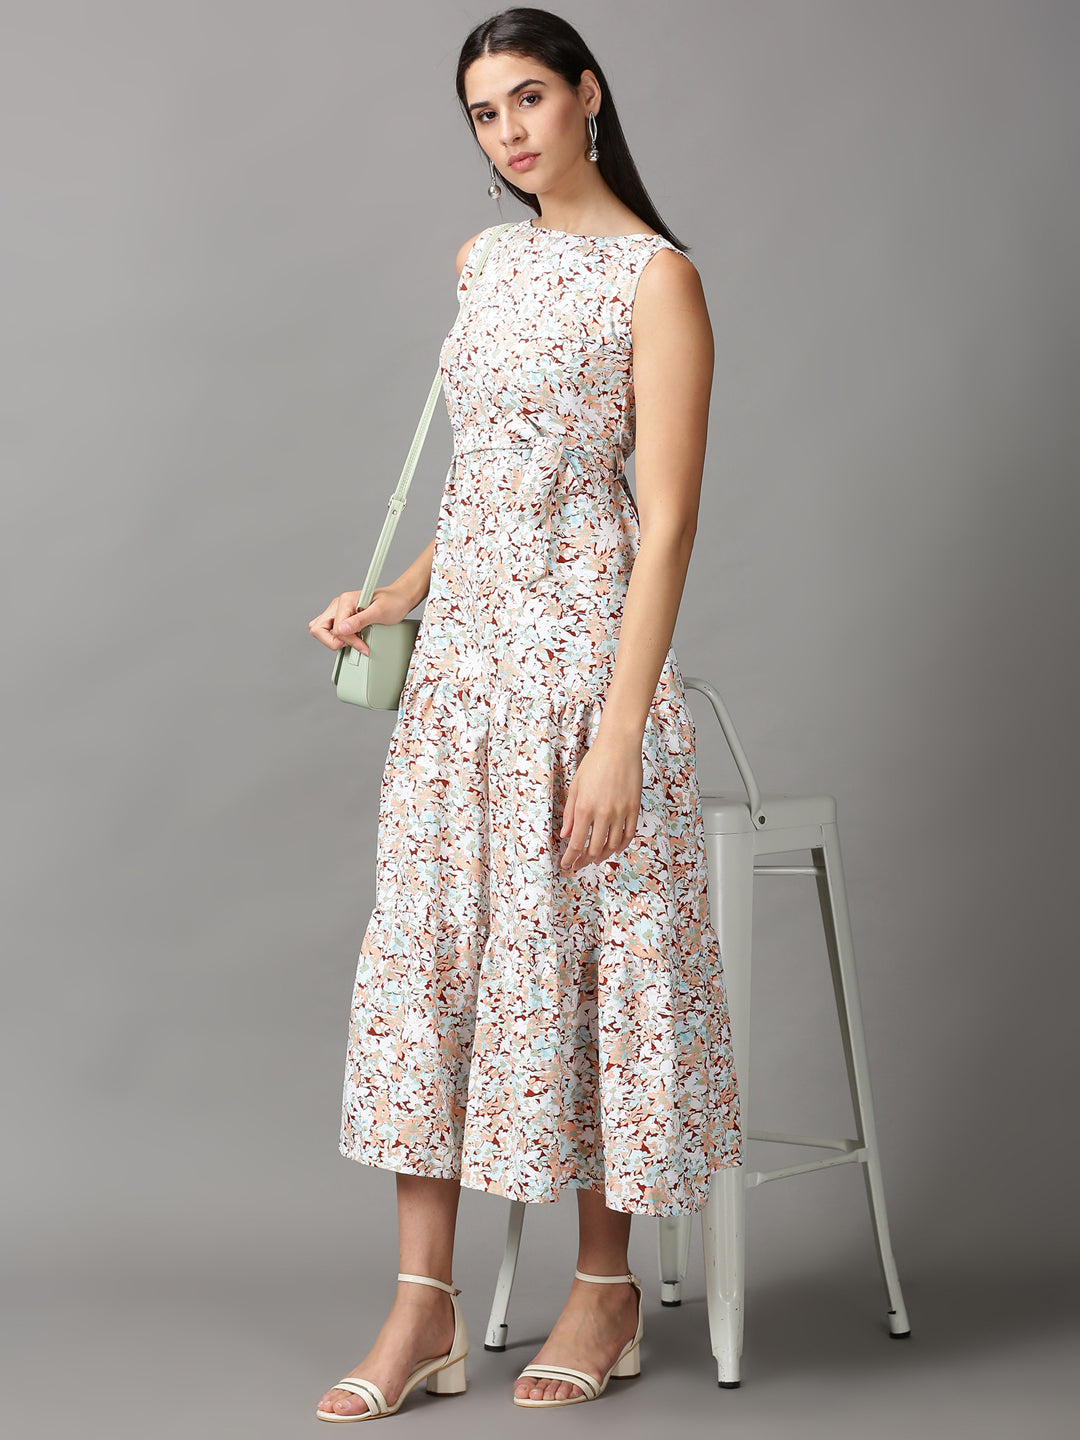 Women's Multi Printed Fit and Flare Dress